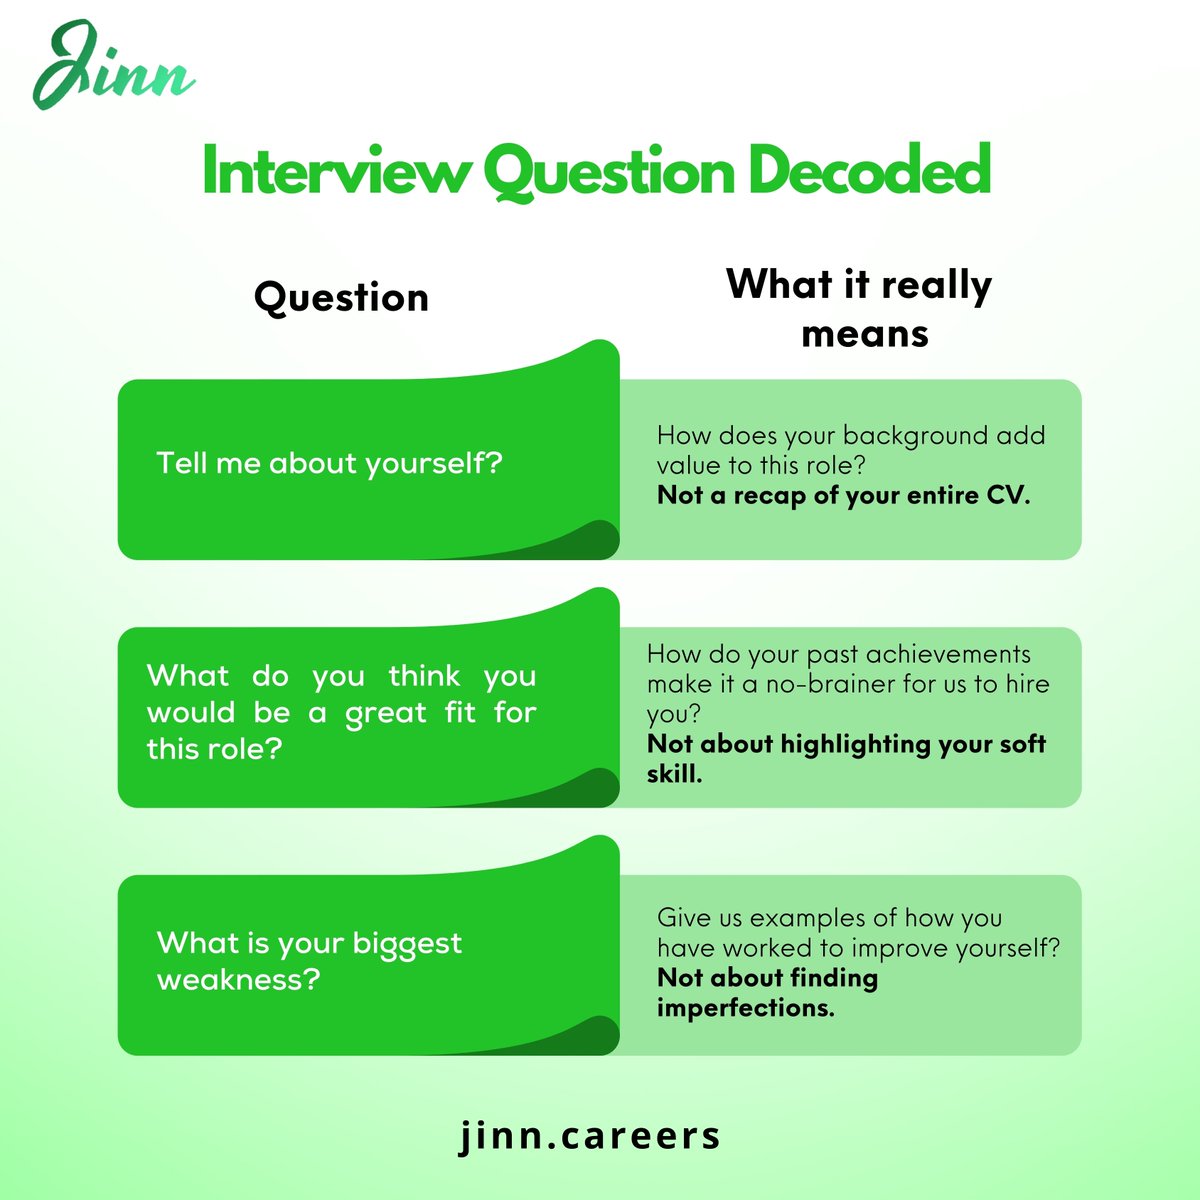 Want more expert advice on acing your next interview?

Stay tuned and follow to keep getting updates/details for career growth

#career #careers #careergoals #careercoach #careerdevelopment #careeradvice #job #jobs #resume #jobsearch #interview #jobinterview